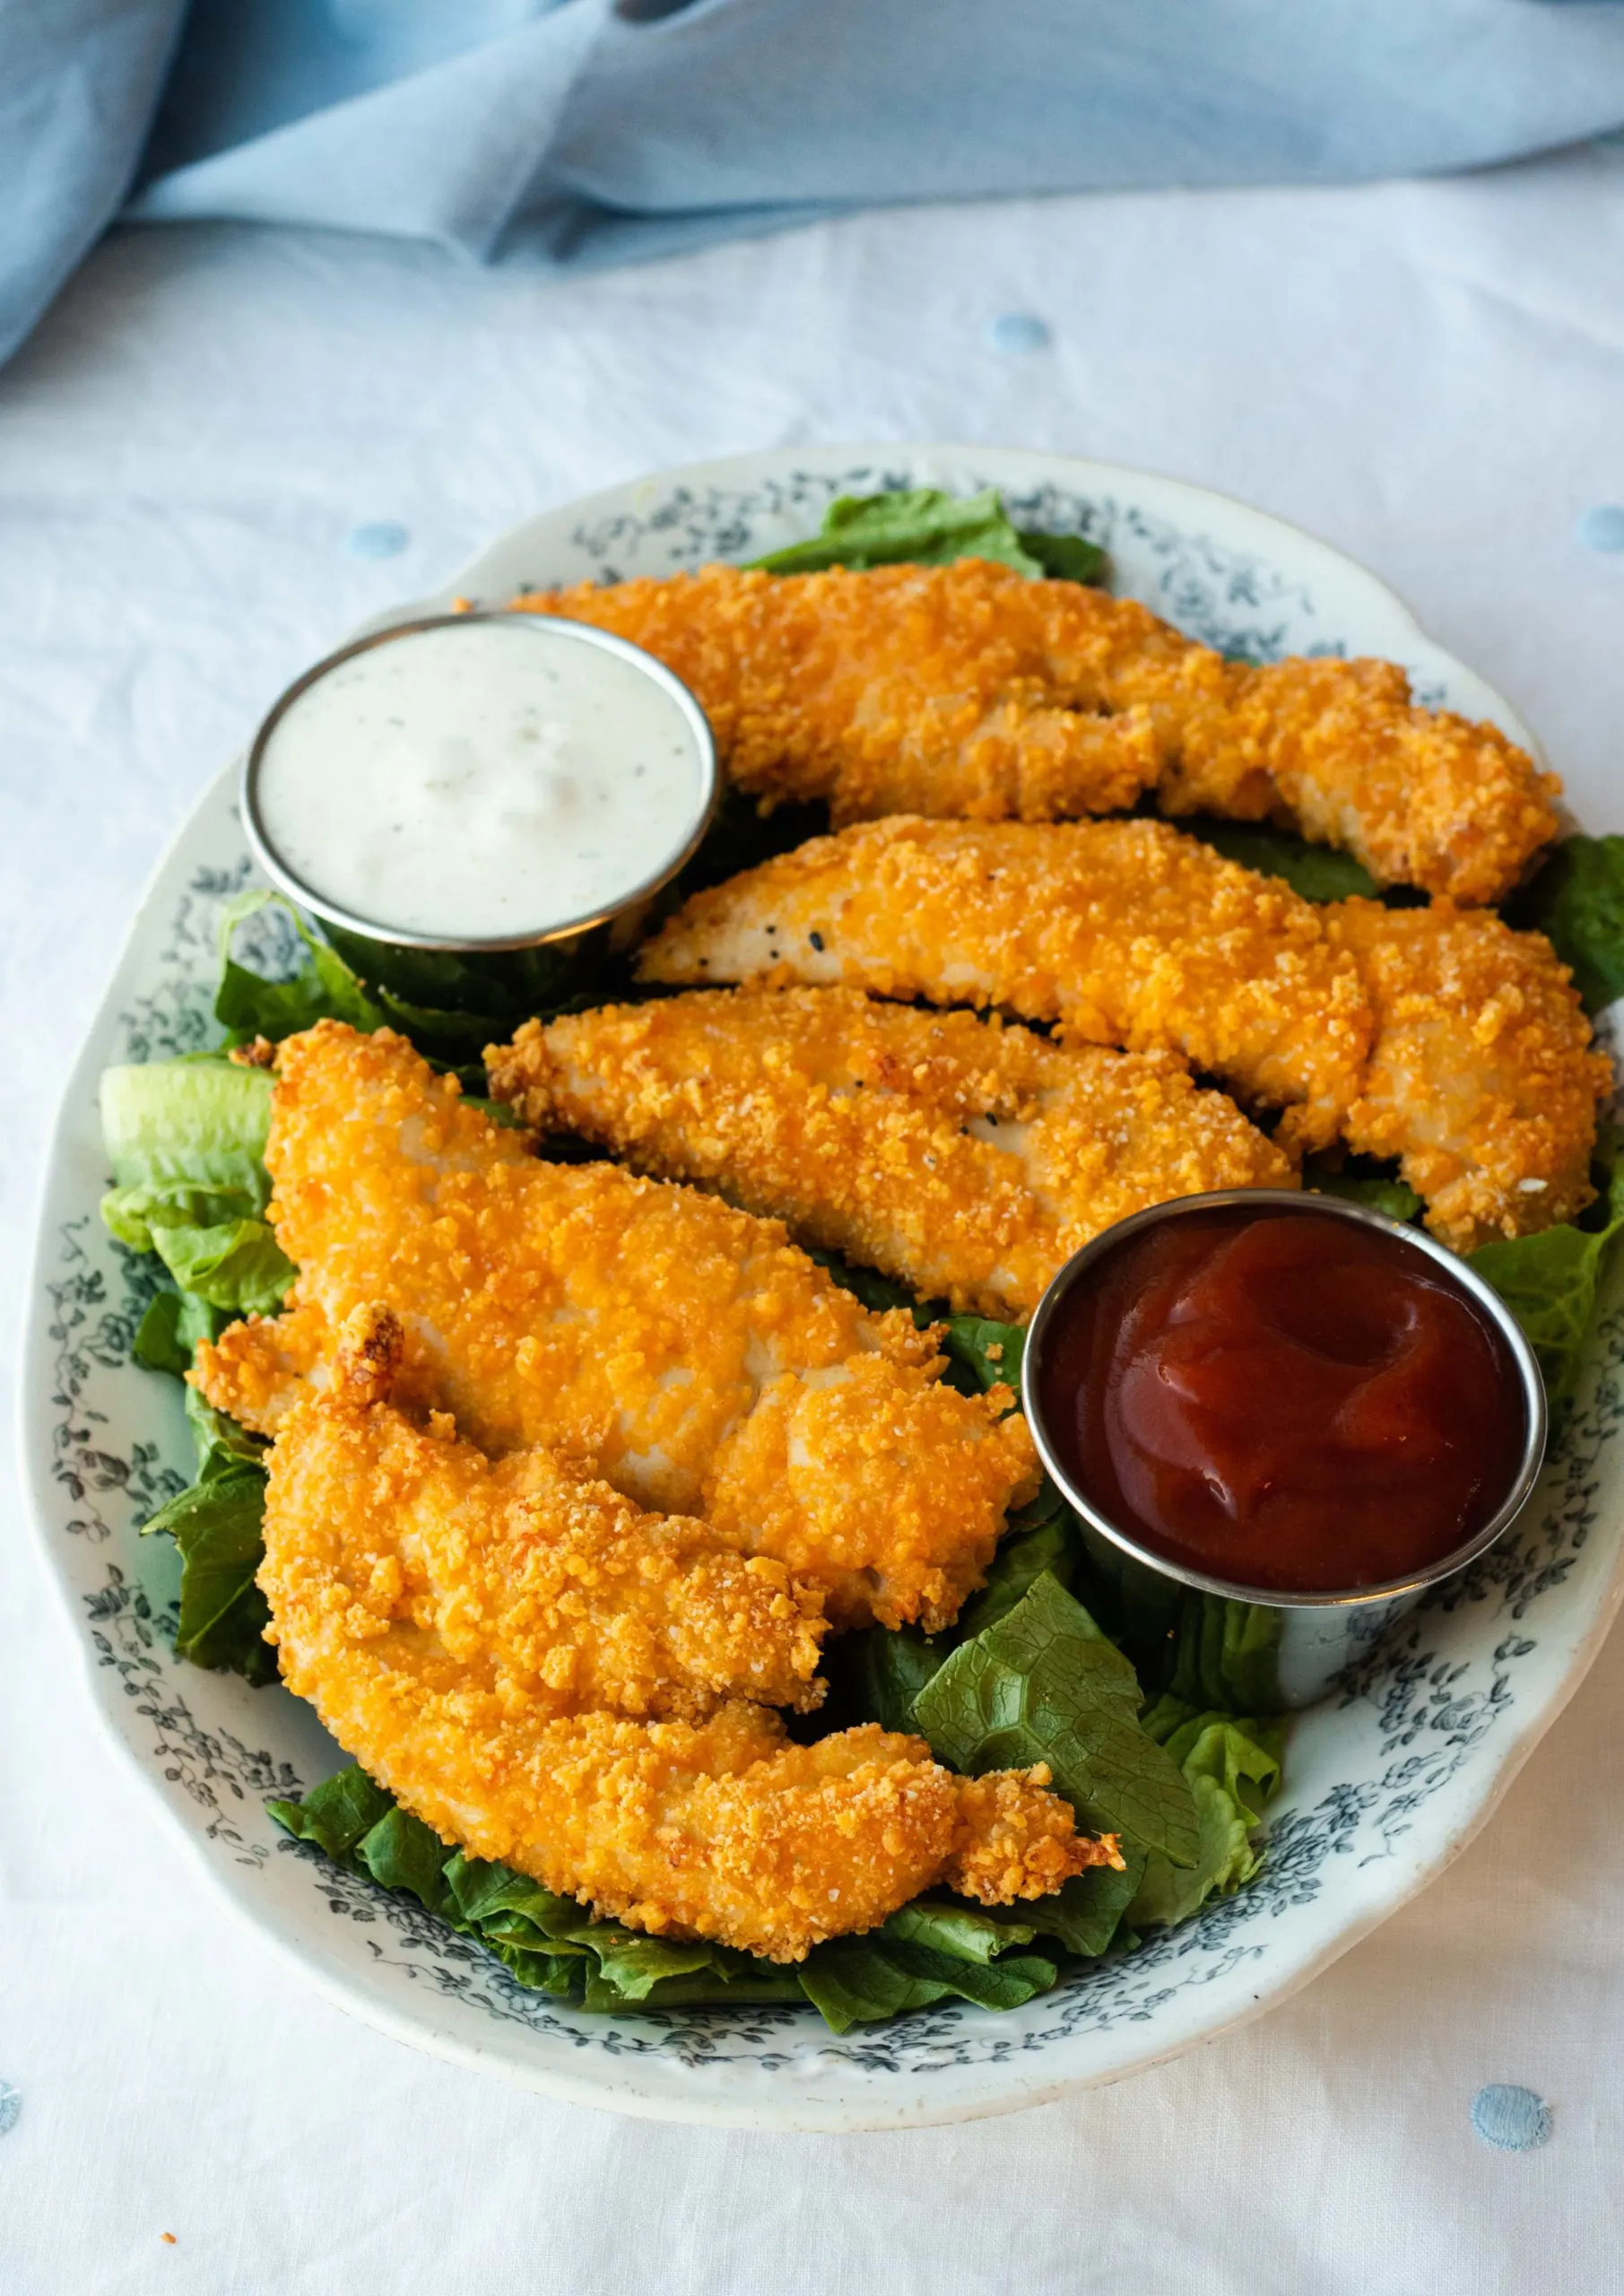 Chicken tenders are brined in buttermilk and then breaded in a crunchy cheese breading before getting baked to perfection. No eggs or pork rinds required!